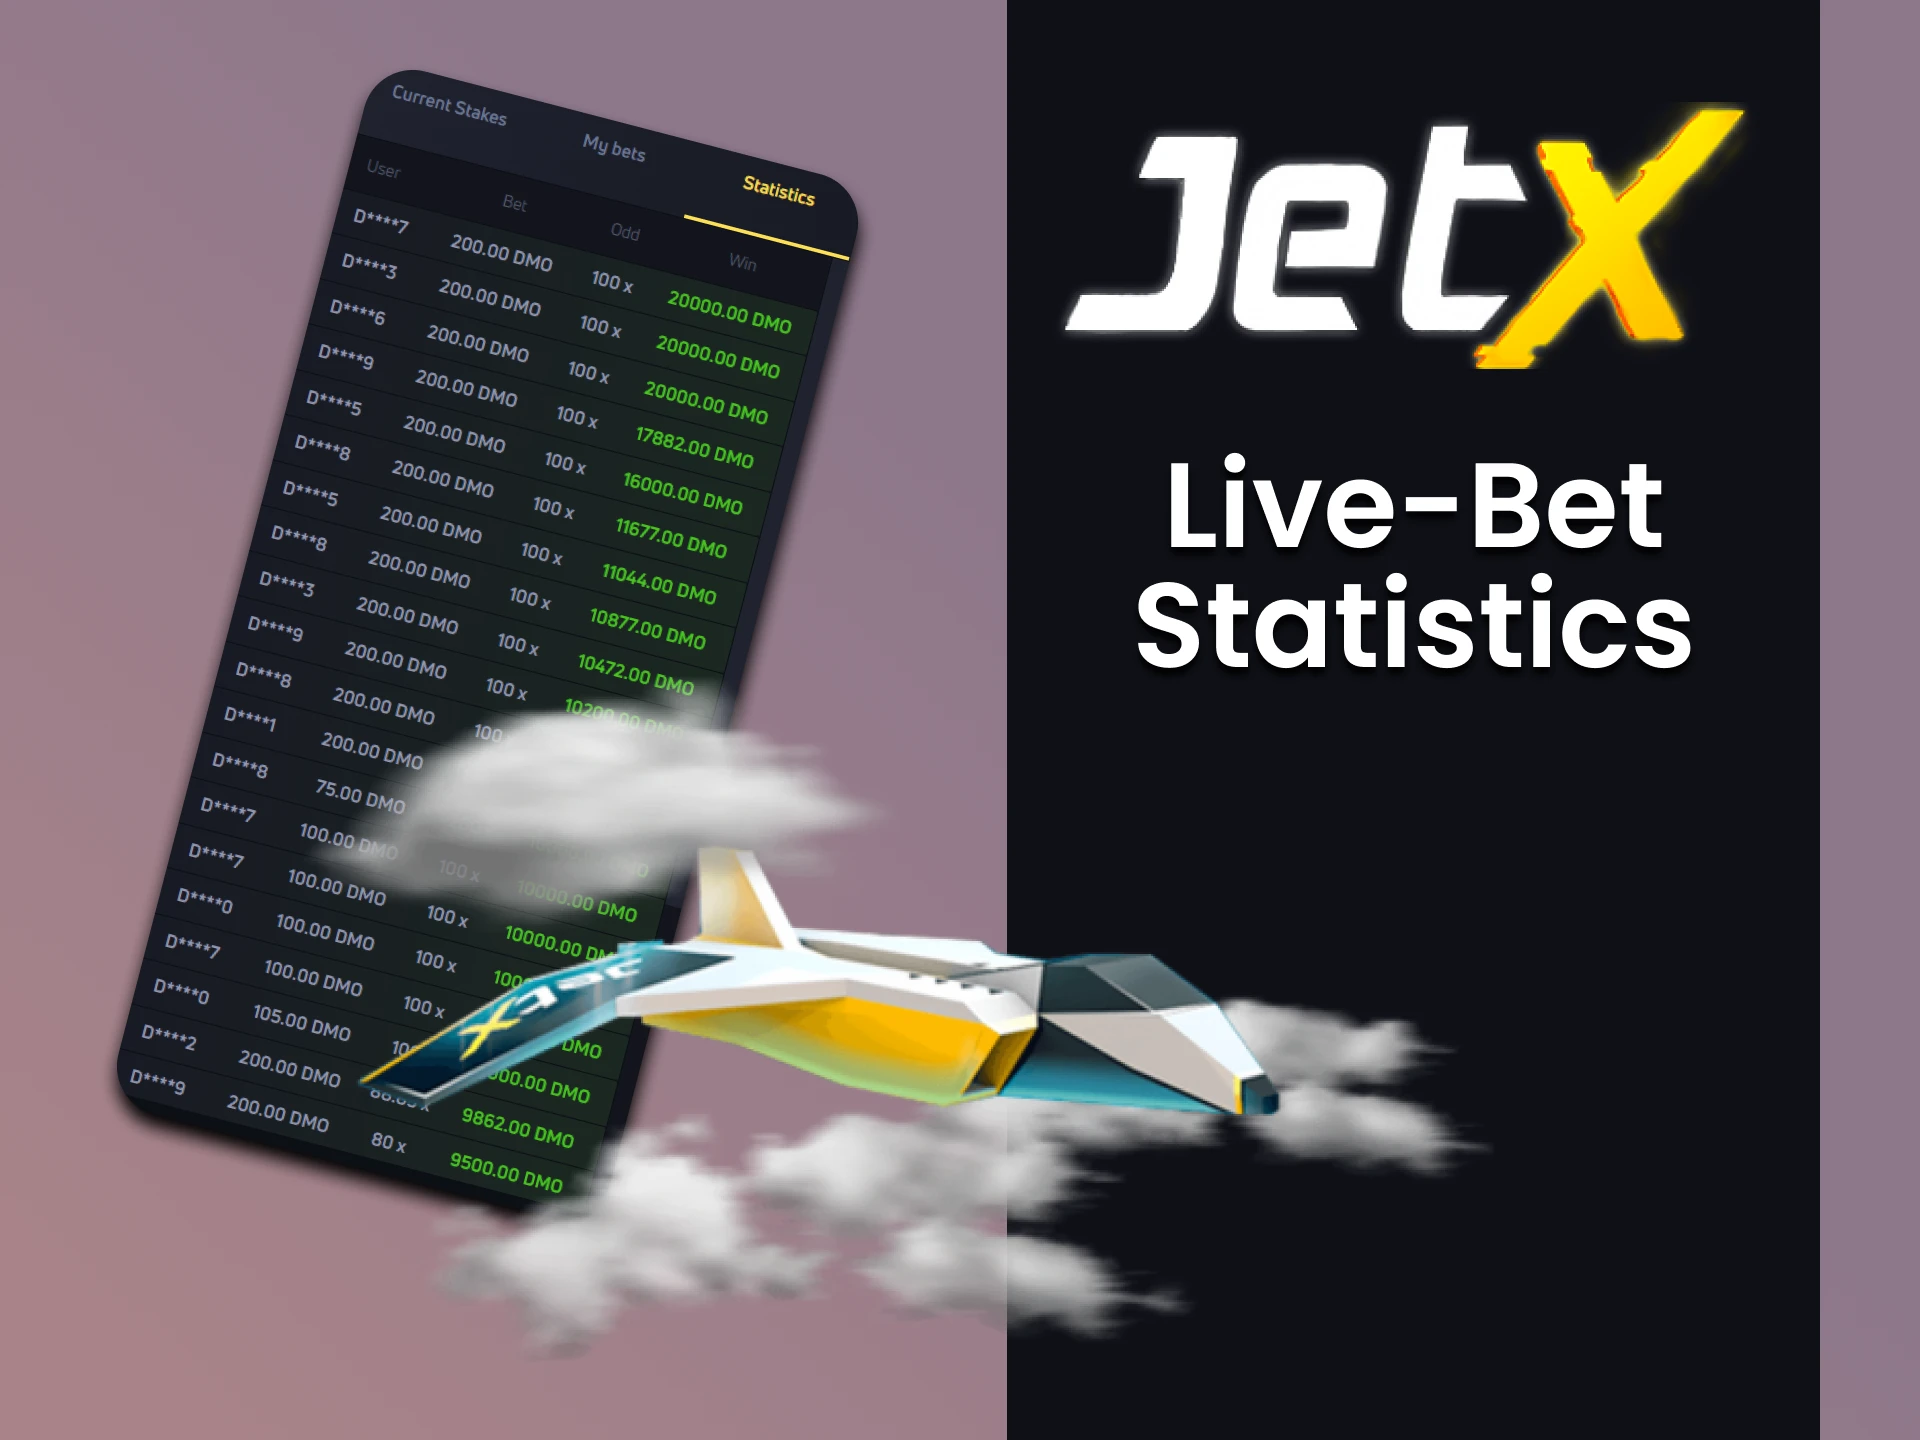 You can watch your stats in JetX game.